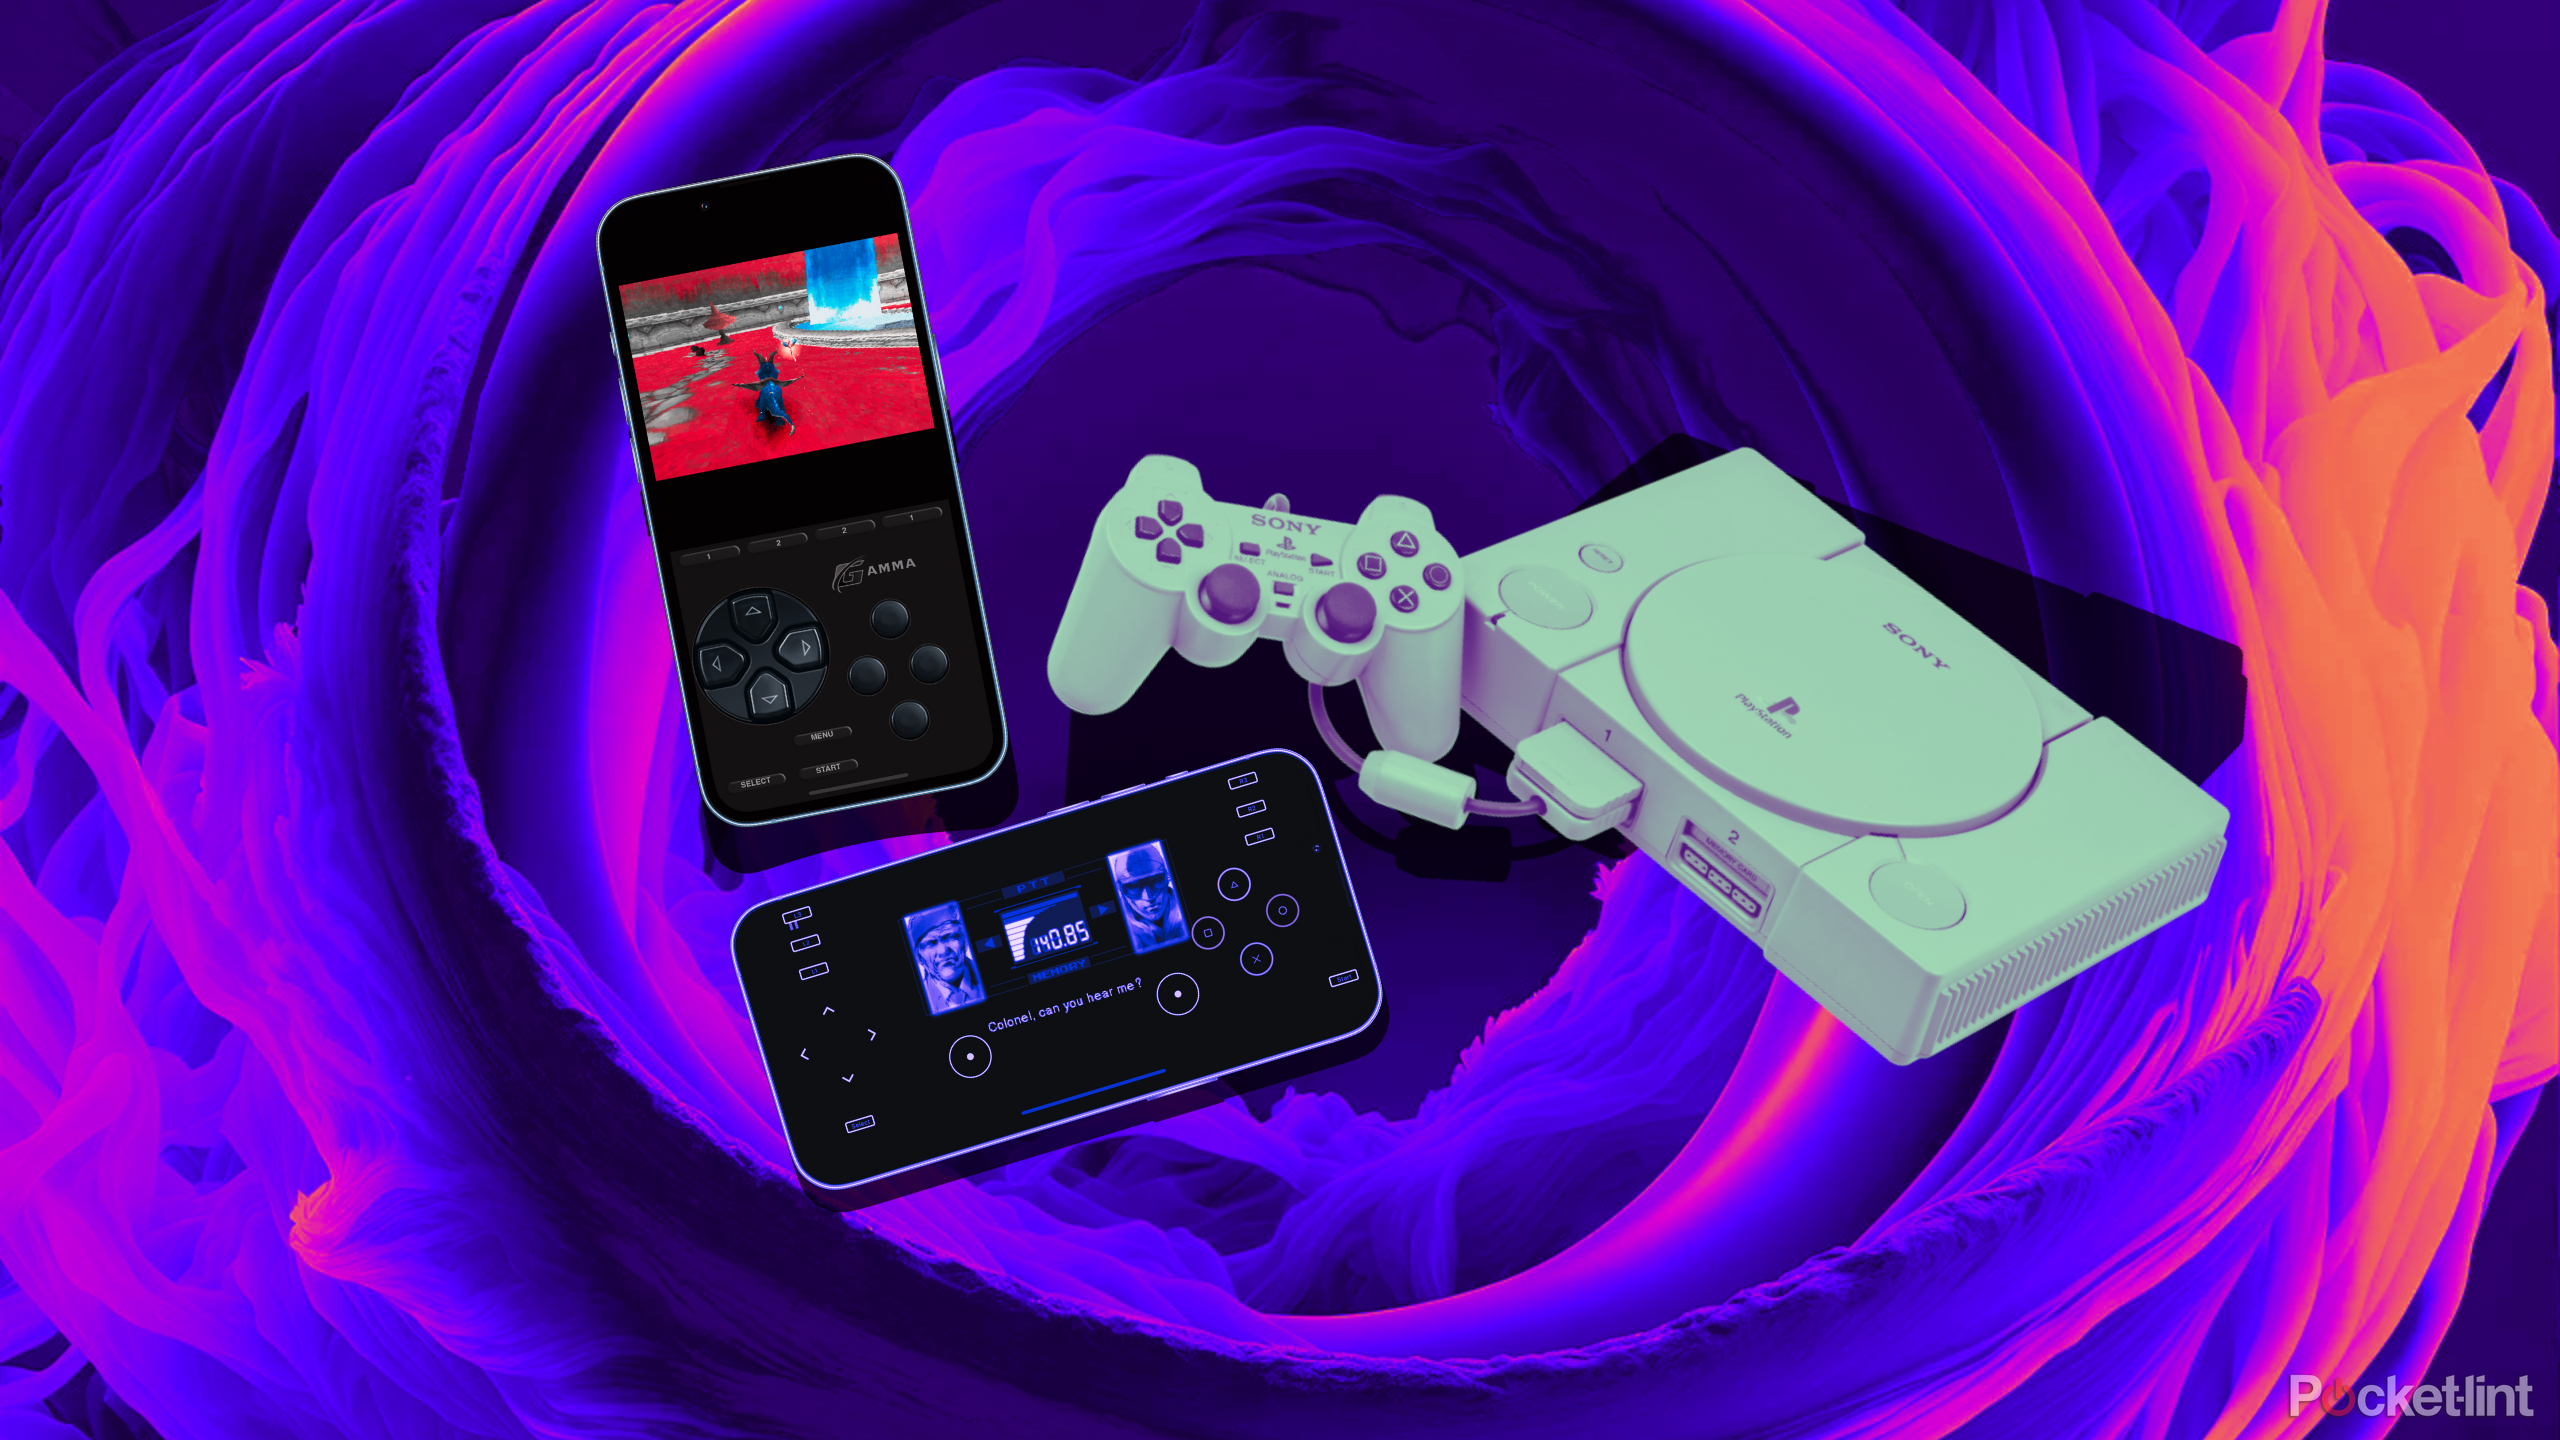 iPhones, a PS1, and a PS1 controller on a futuristic background. 